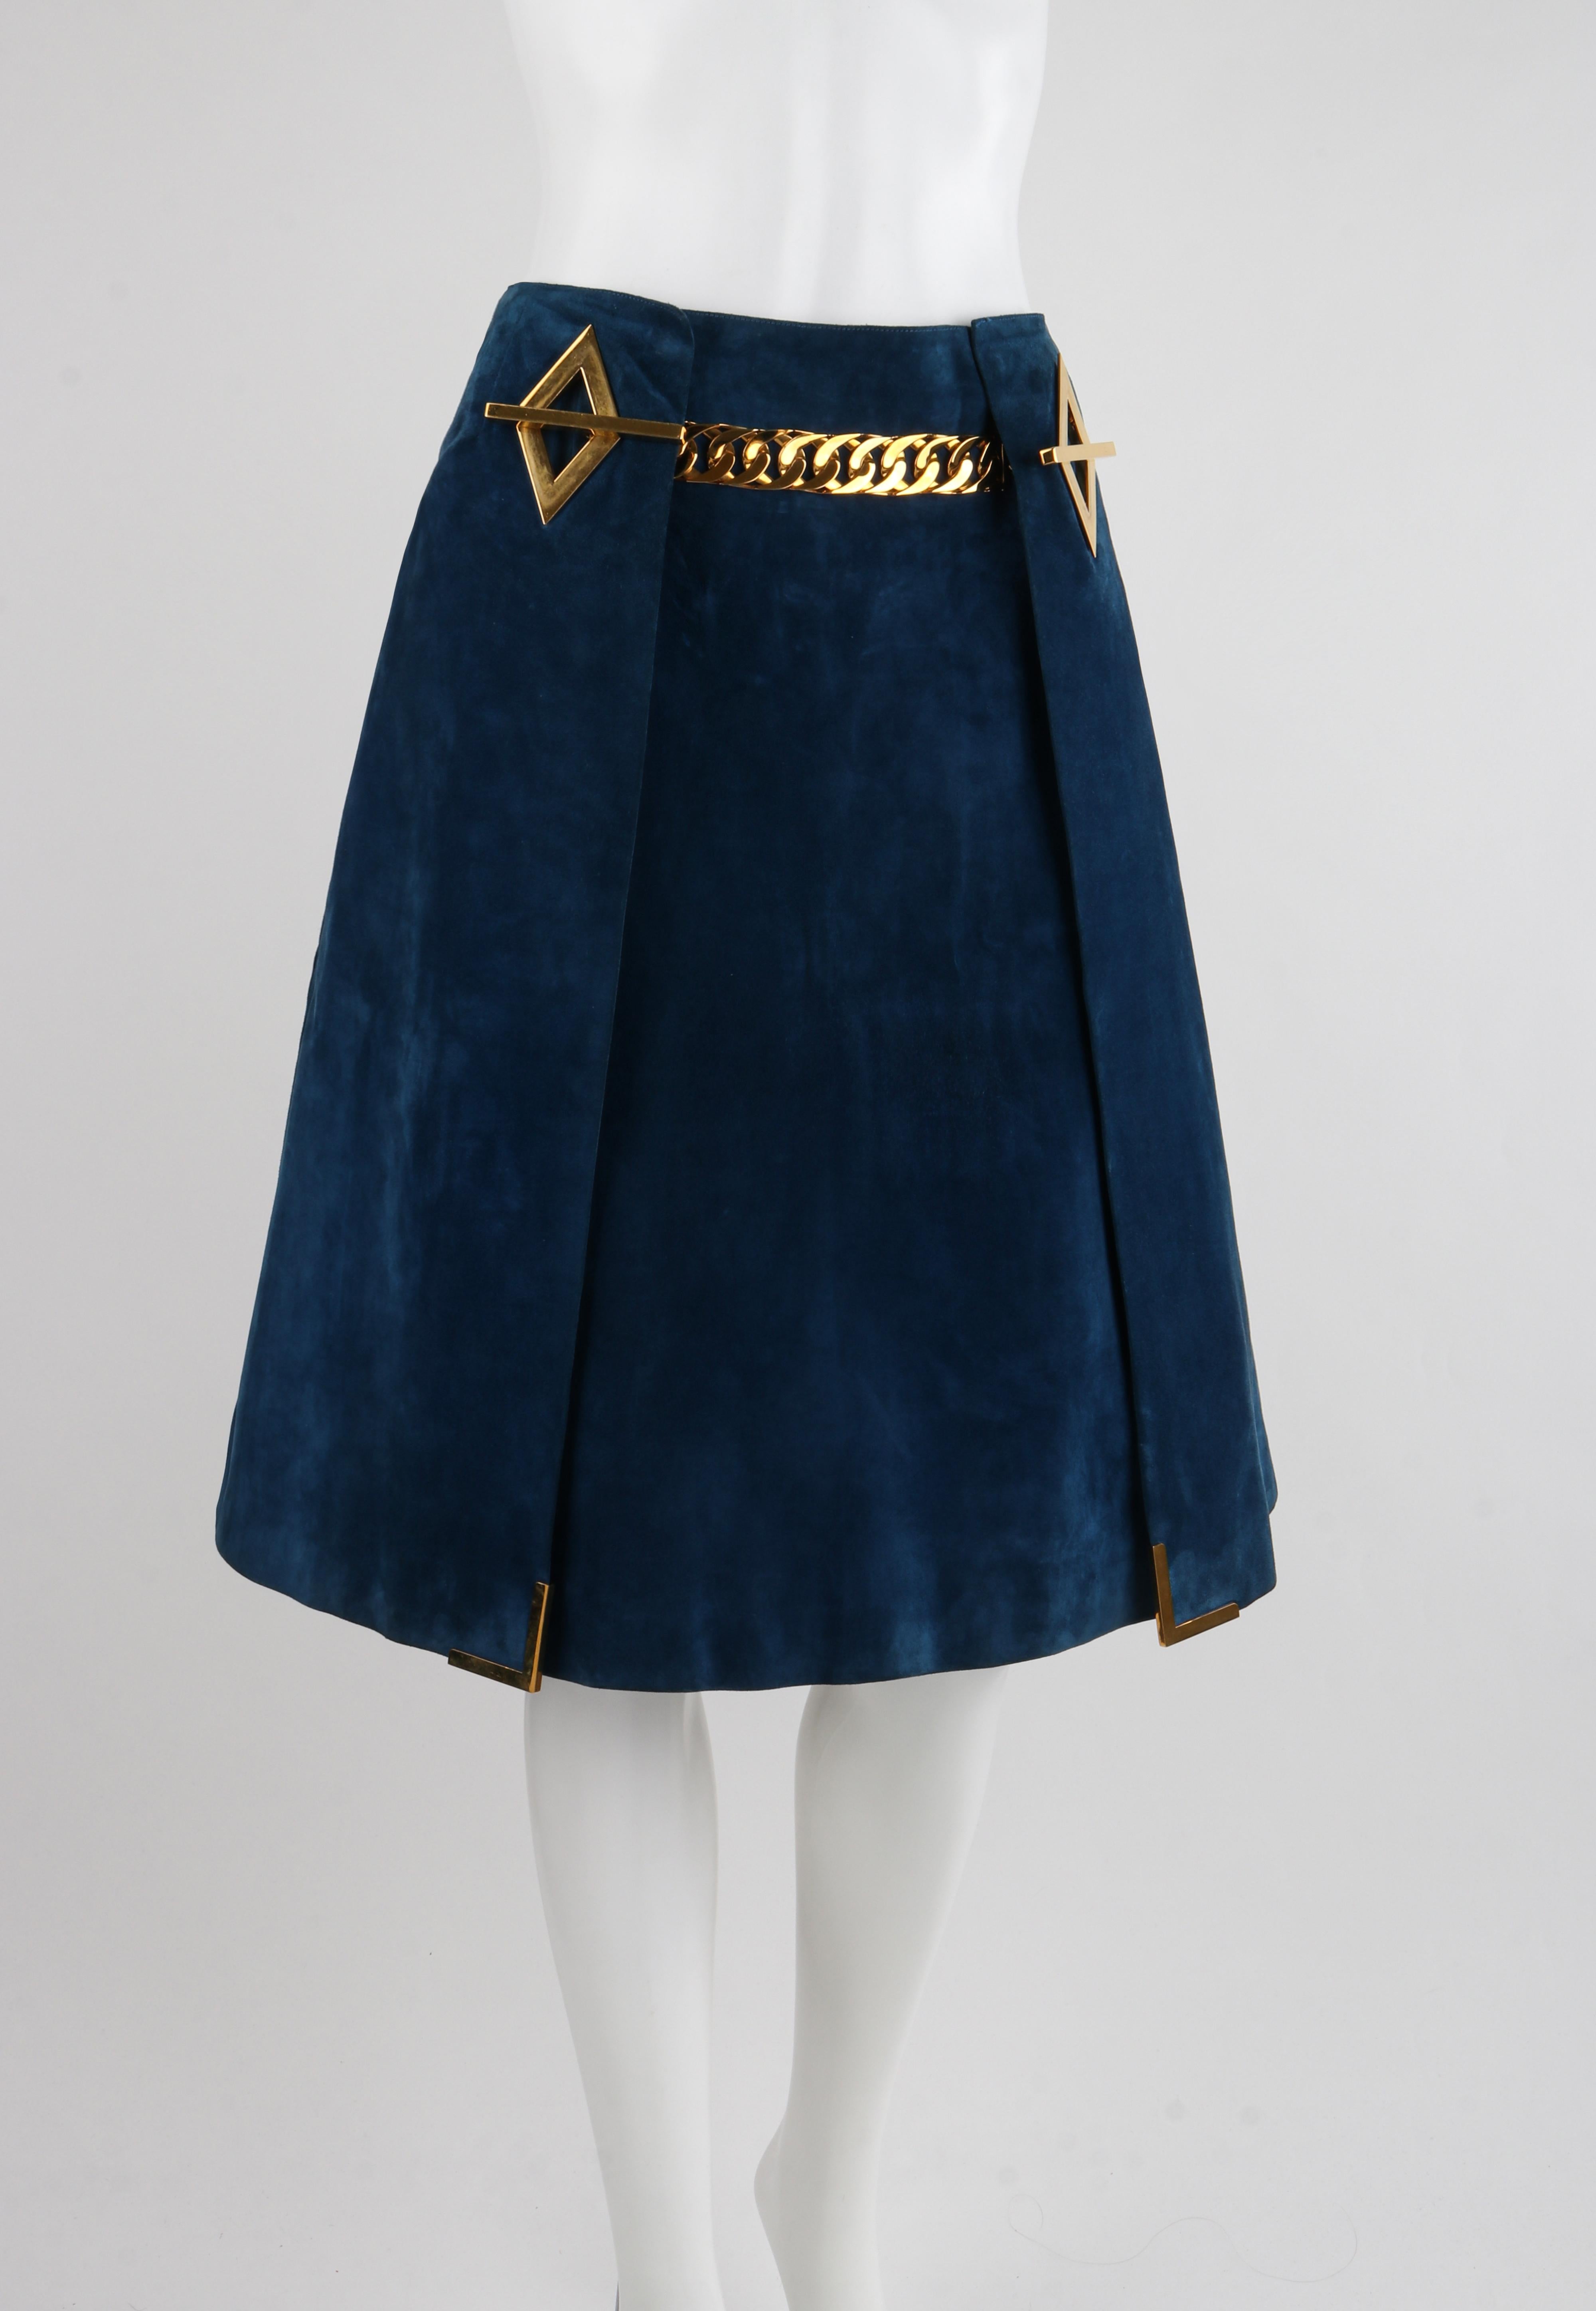 GUCCI c.1970's Dark Blue Suede Gold Chain Belt Pleated A-Line Knee Length Skirt In Good Condition For Sale In Thiensville, WI